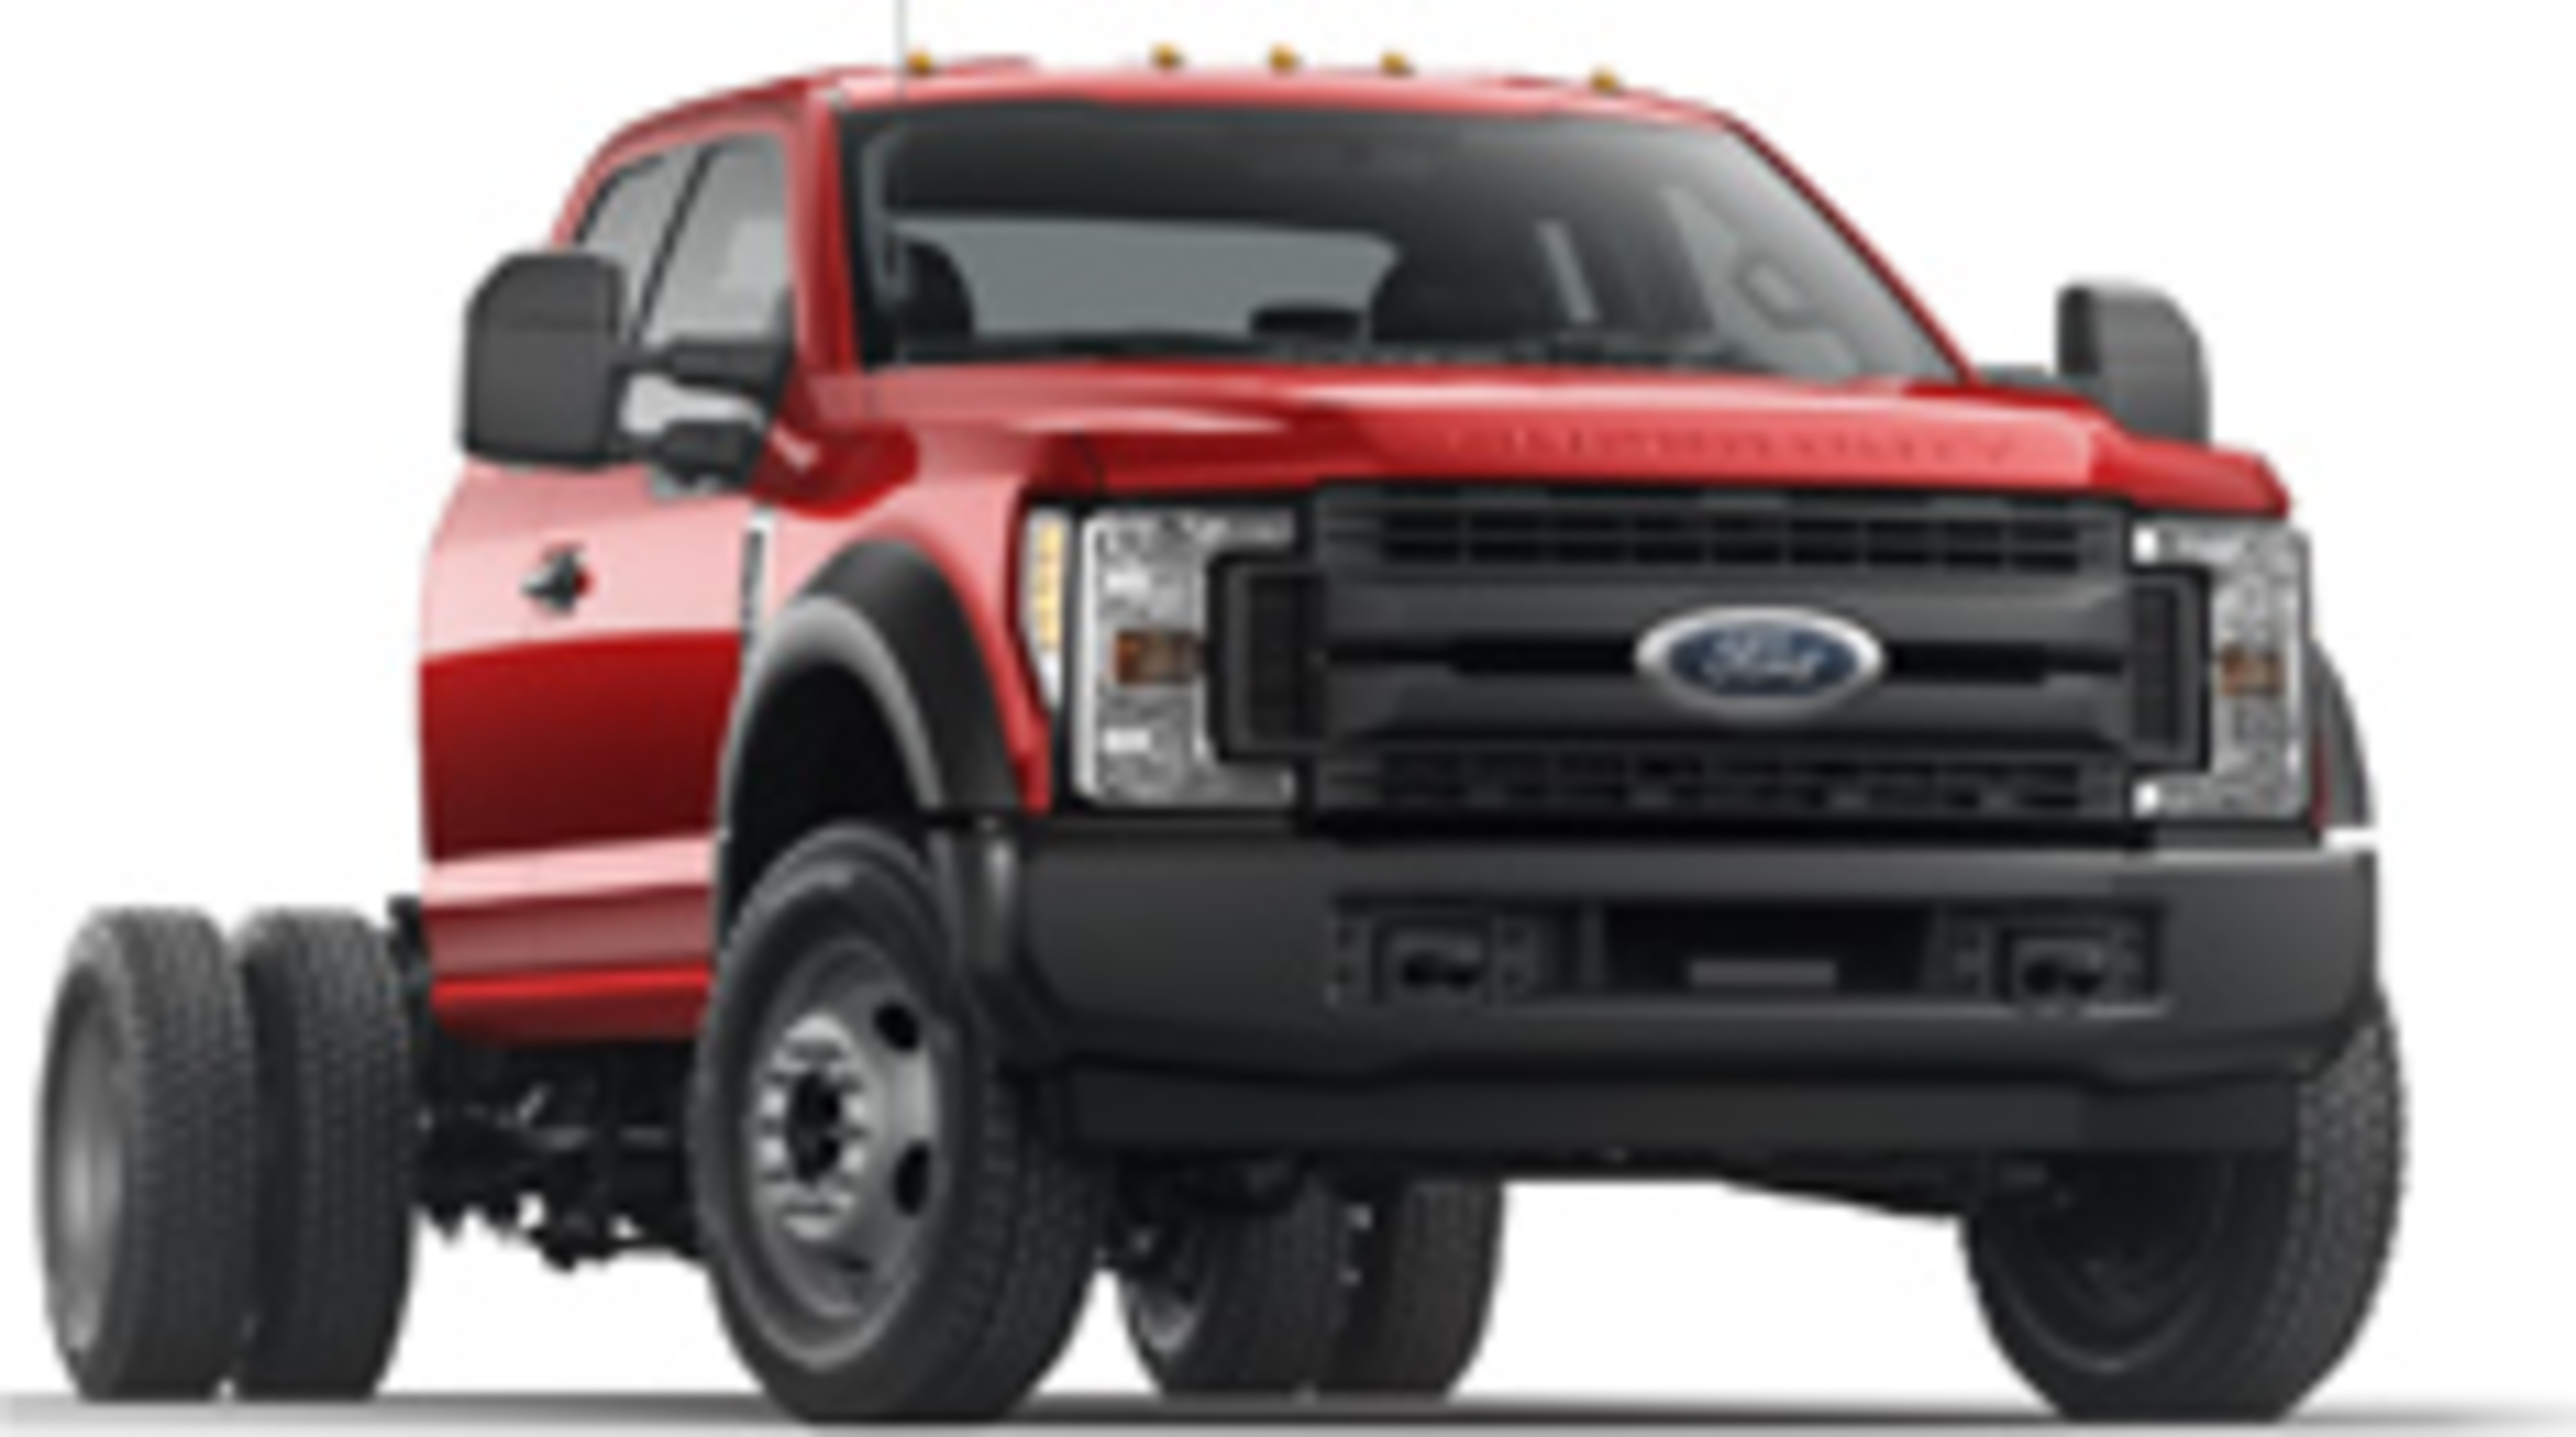 2018 Ford F-450 Super Duty Service and Repair Manual